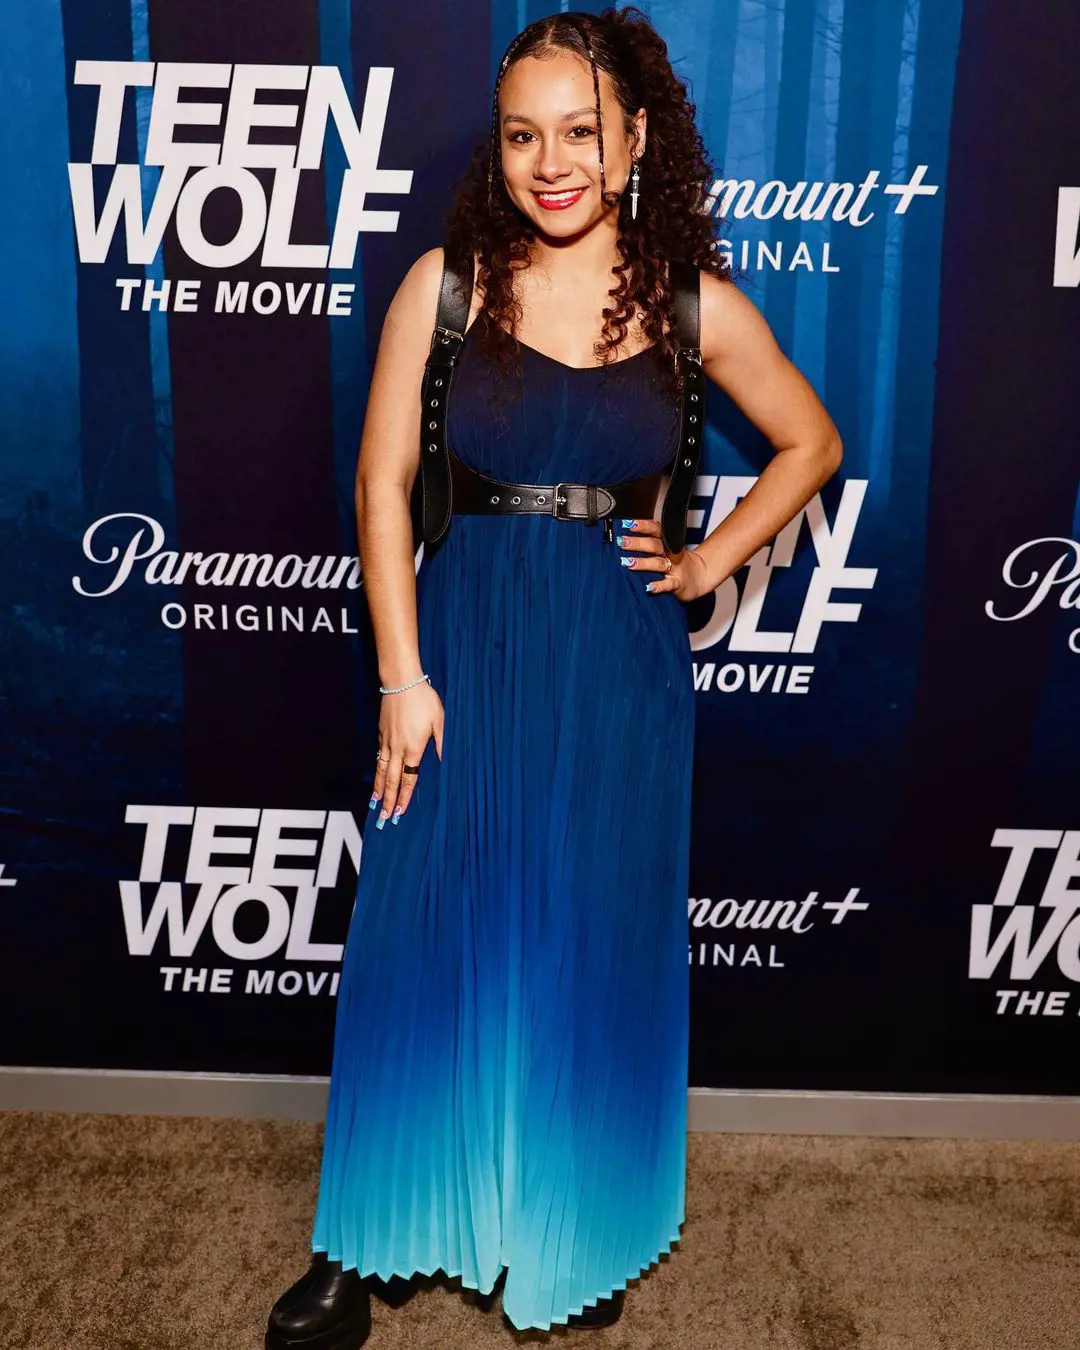 She attended the premiere of Teen Wolf: The Movie on 21st January 2023. 